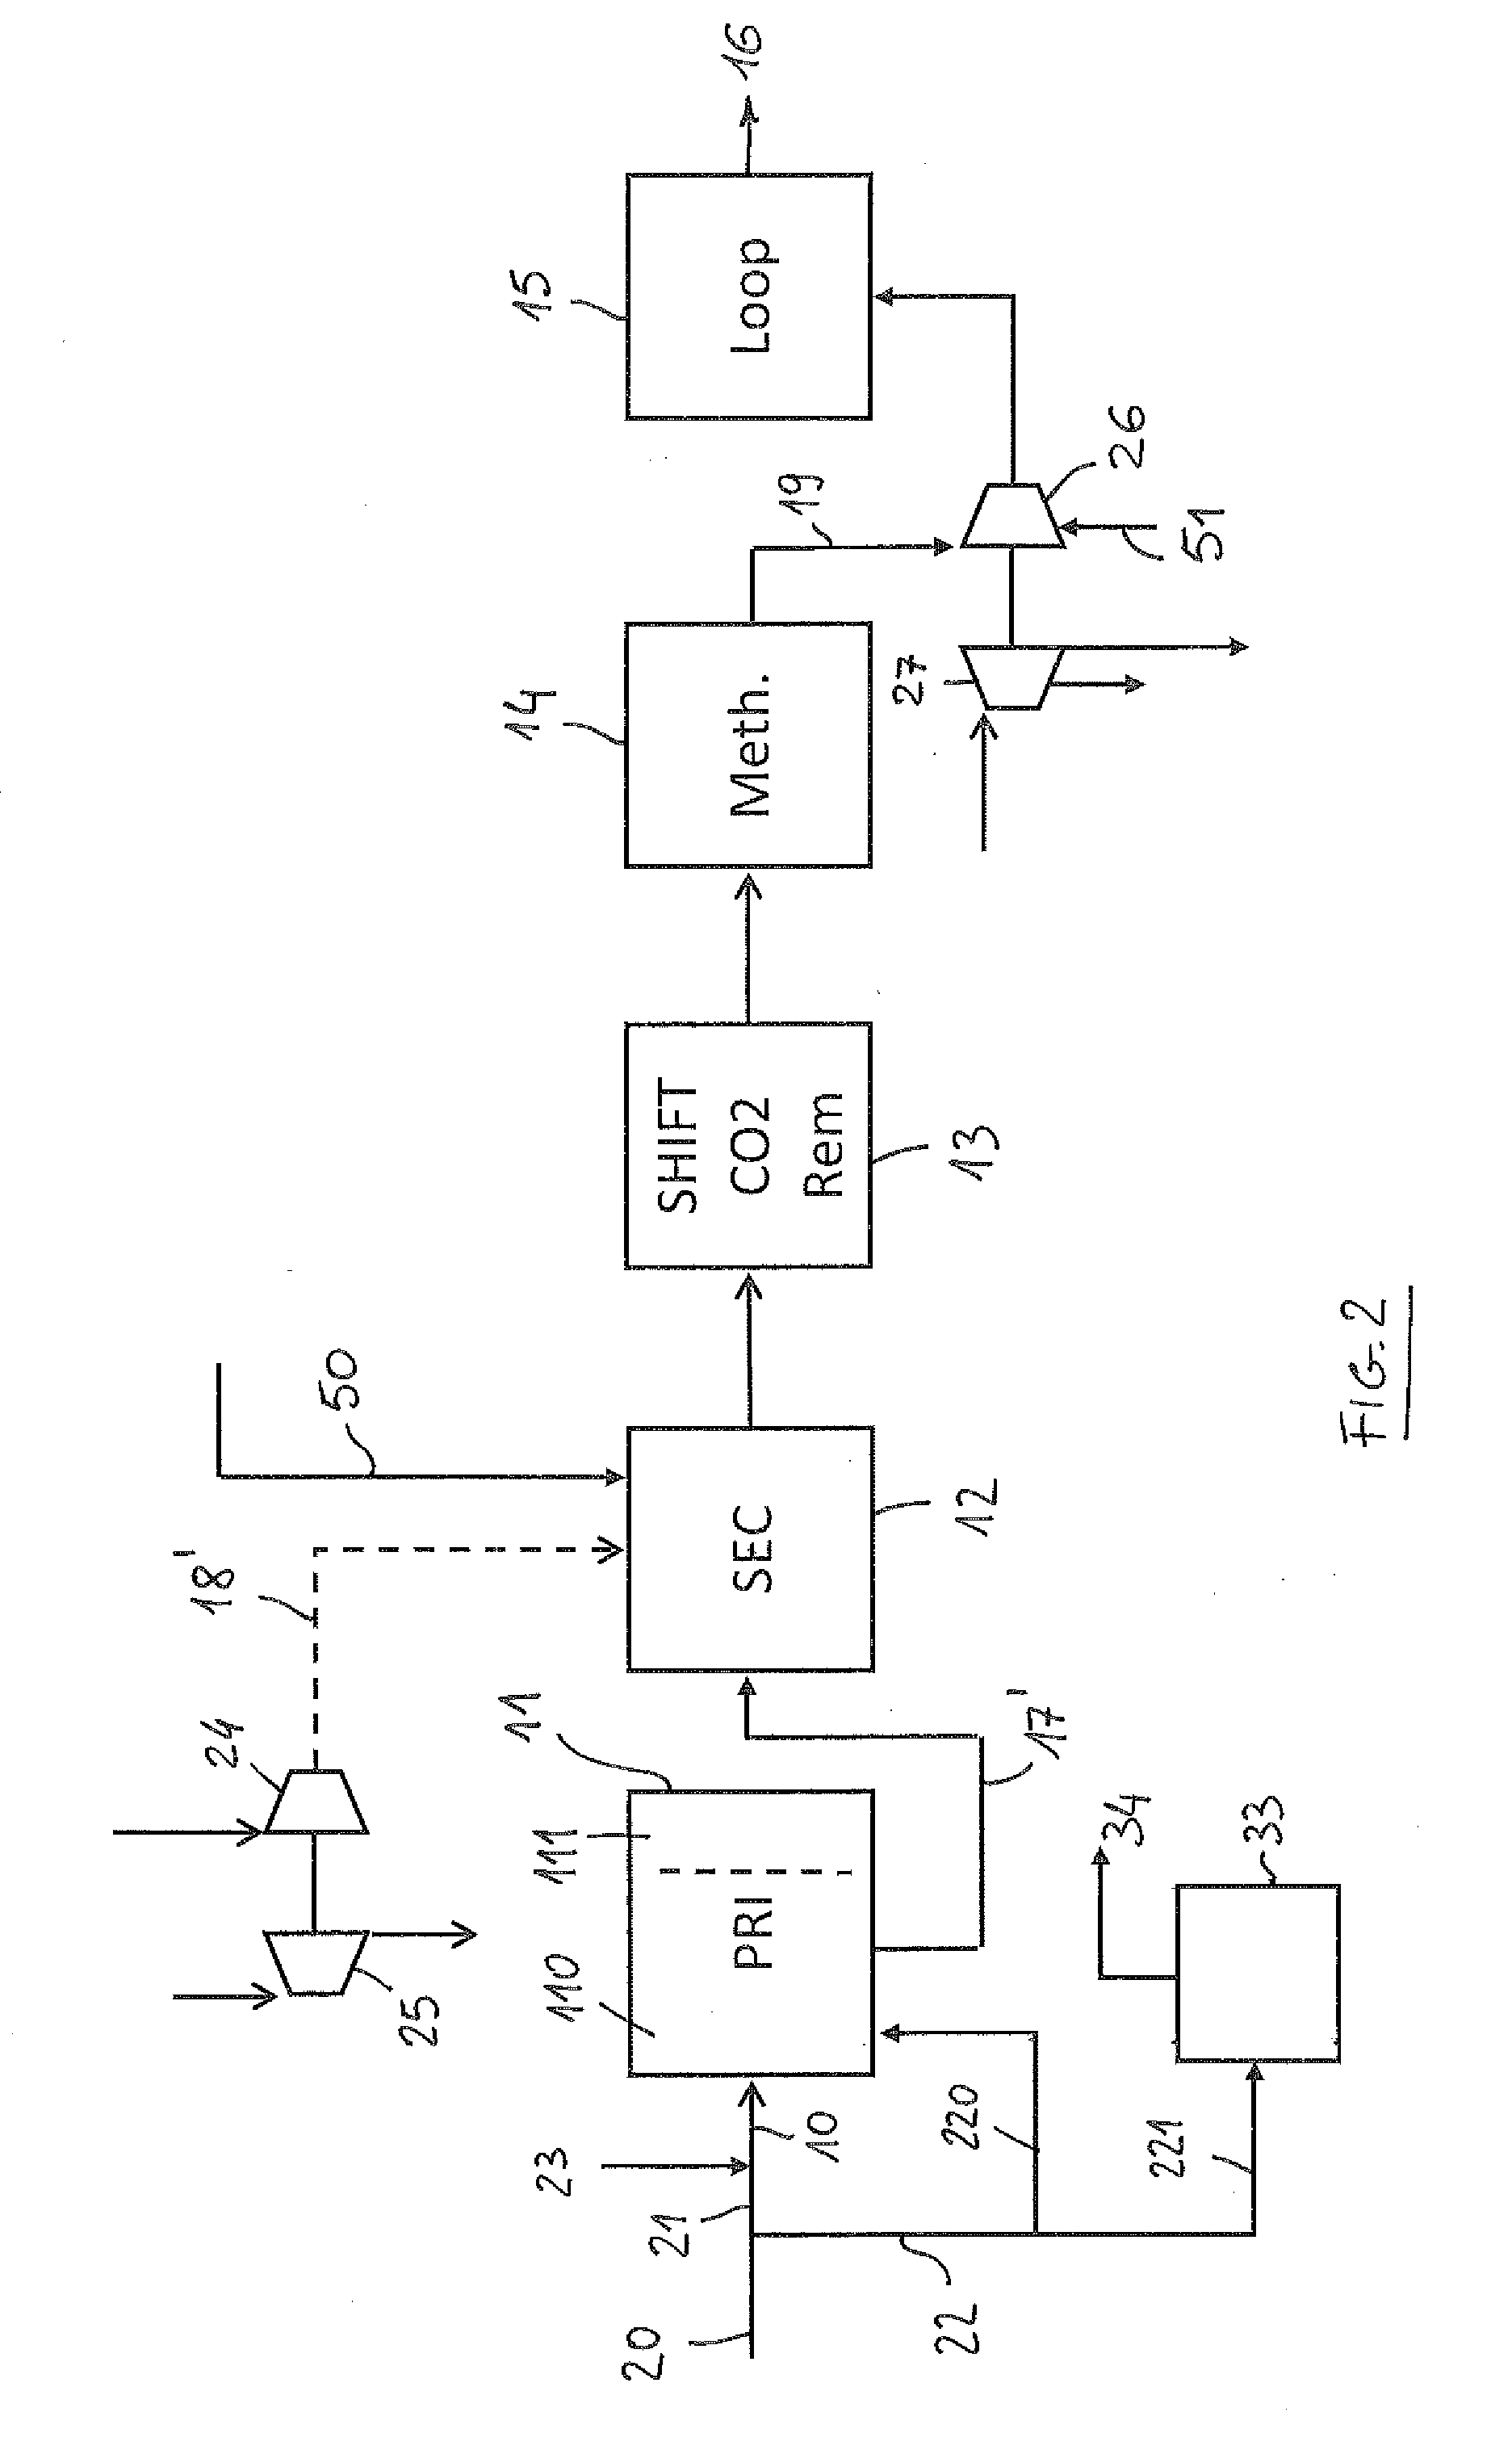 Method of revamping of an ammonia plant fed with natural gas